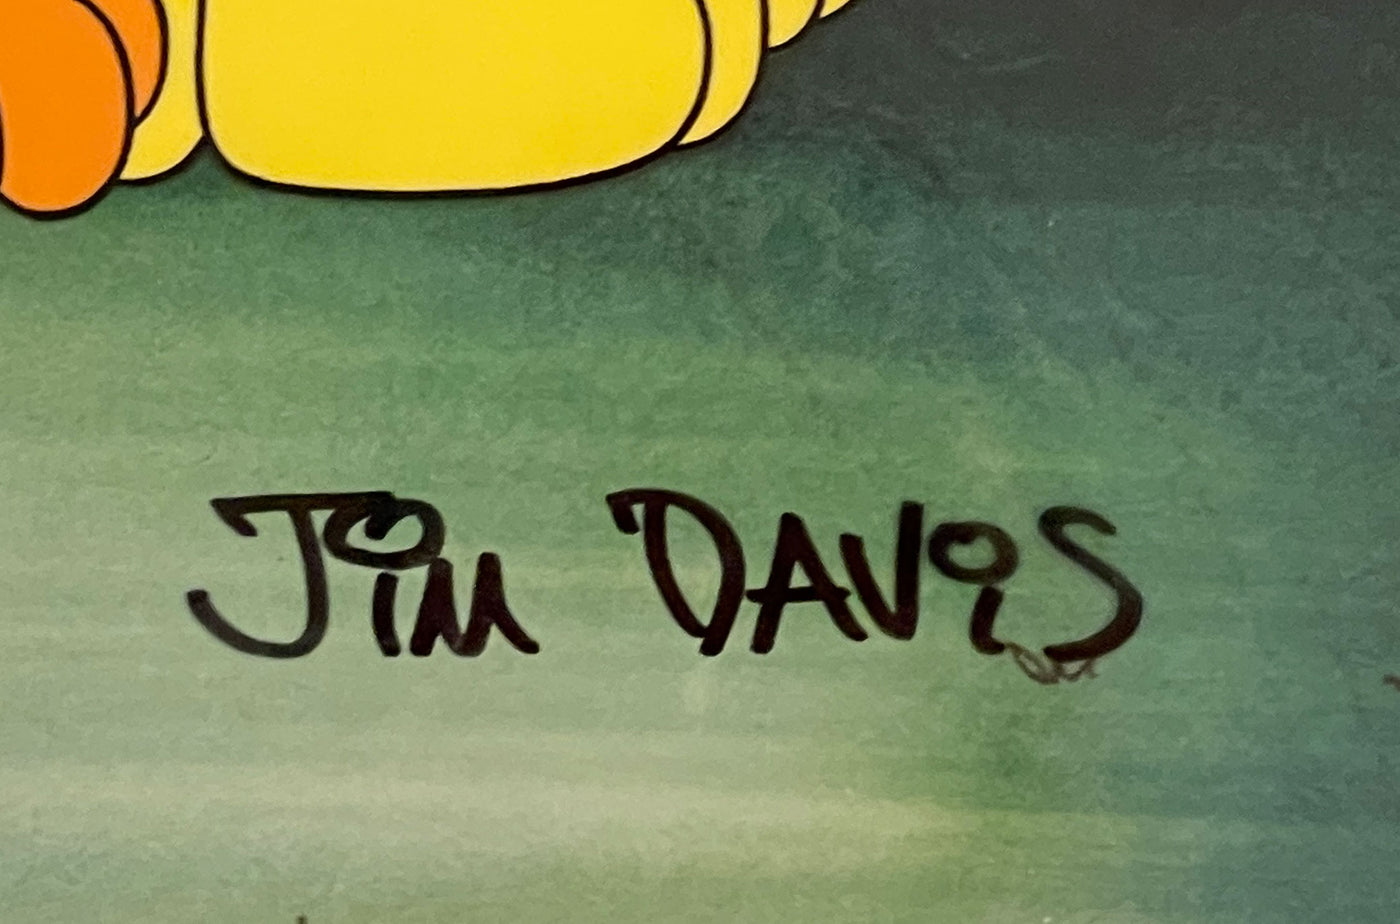 Paws INC Limited Edition Cel Featuring Garfield and Odie Signed by Jim Davis